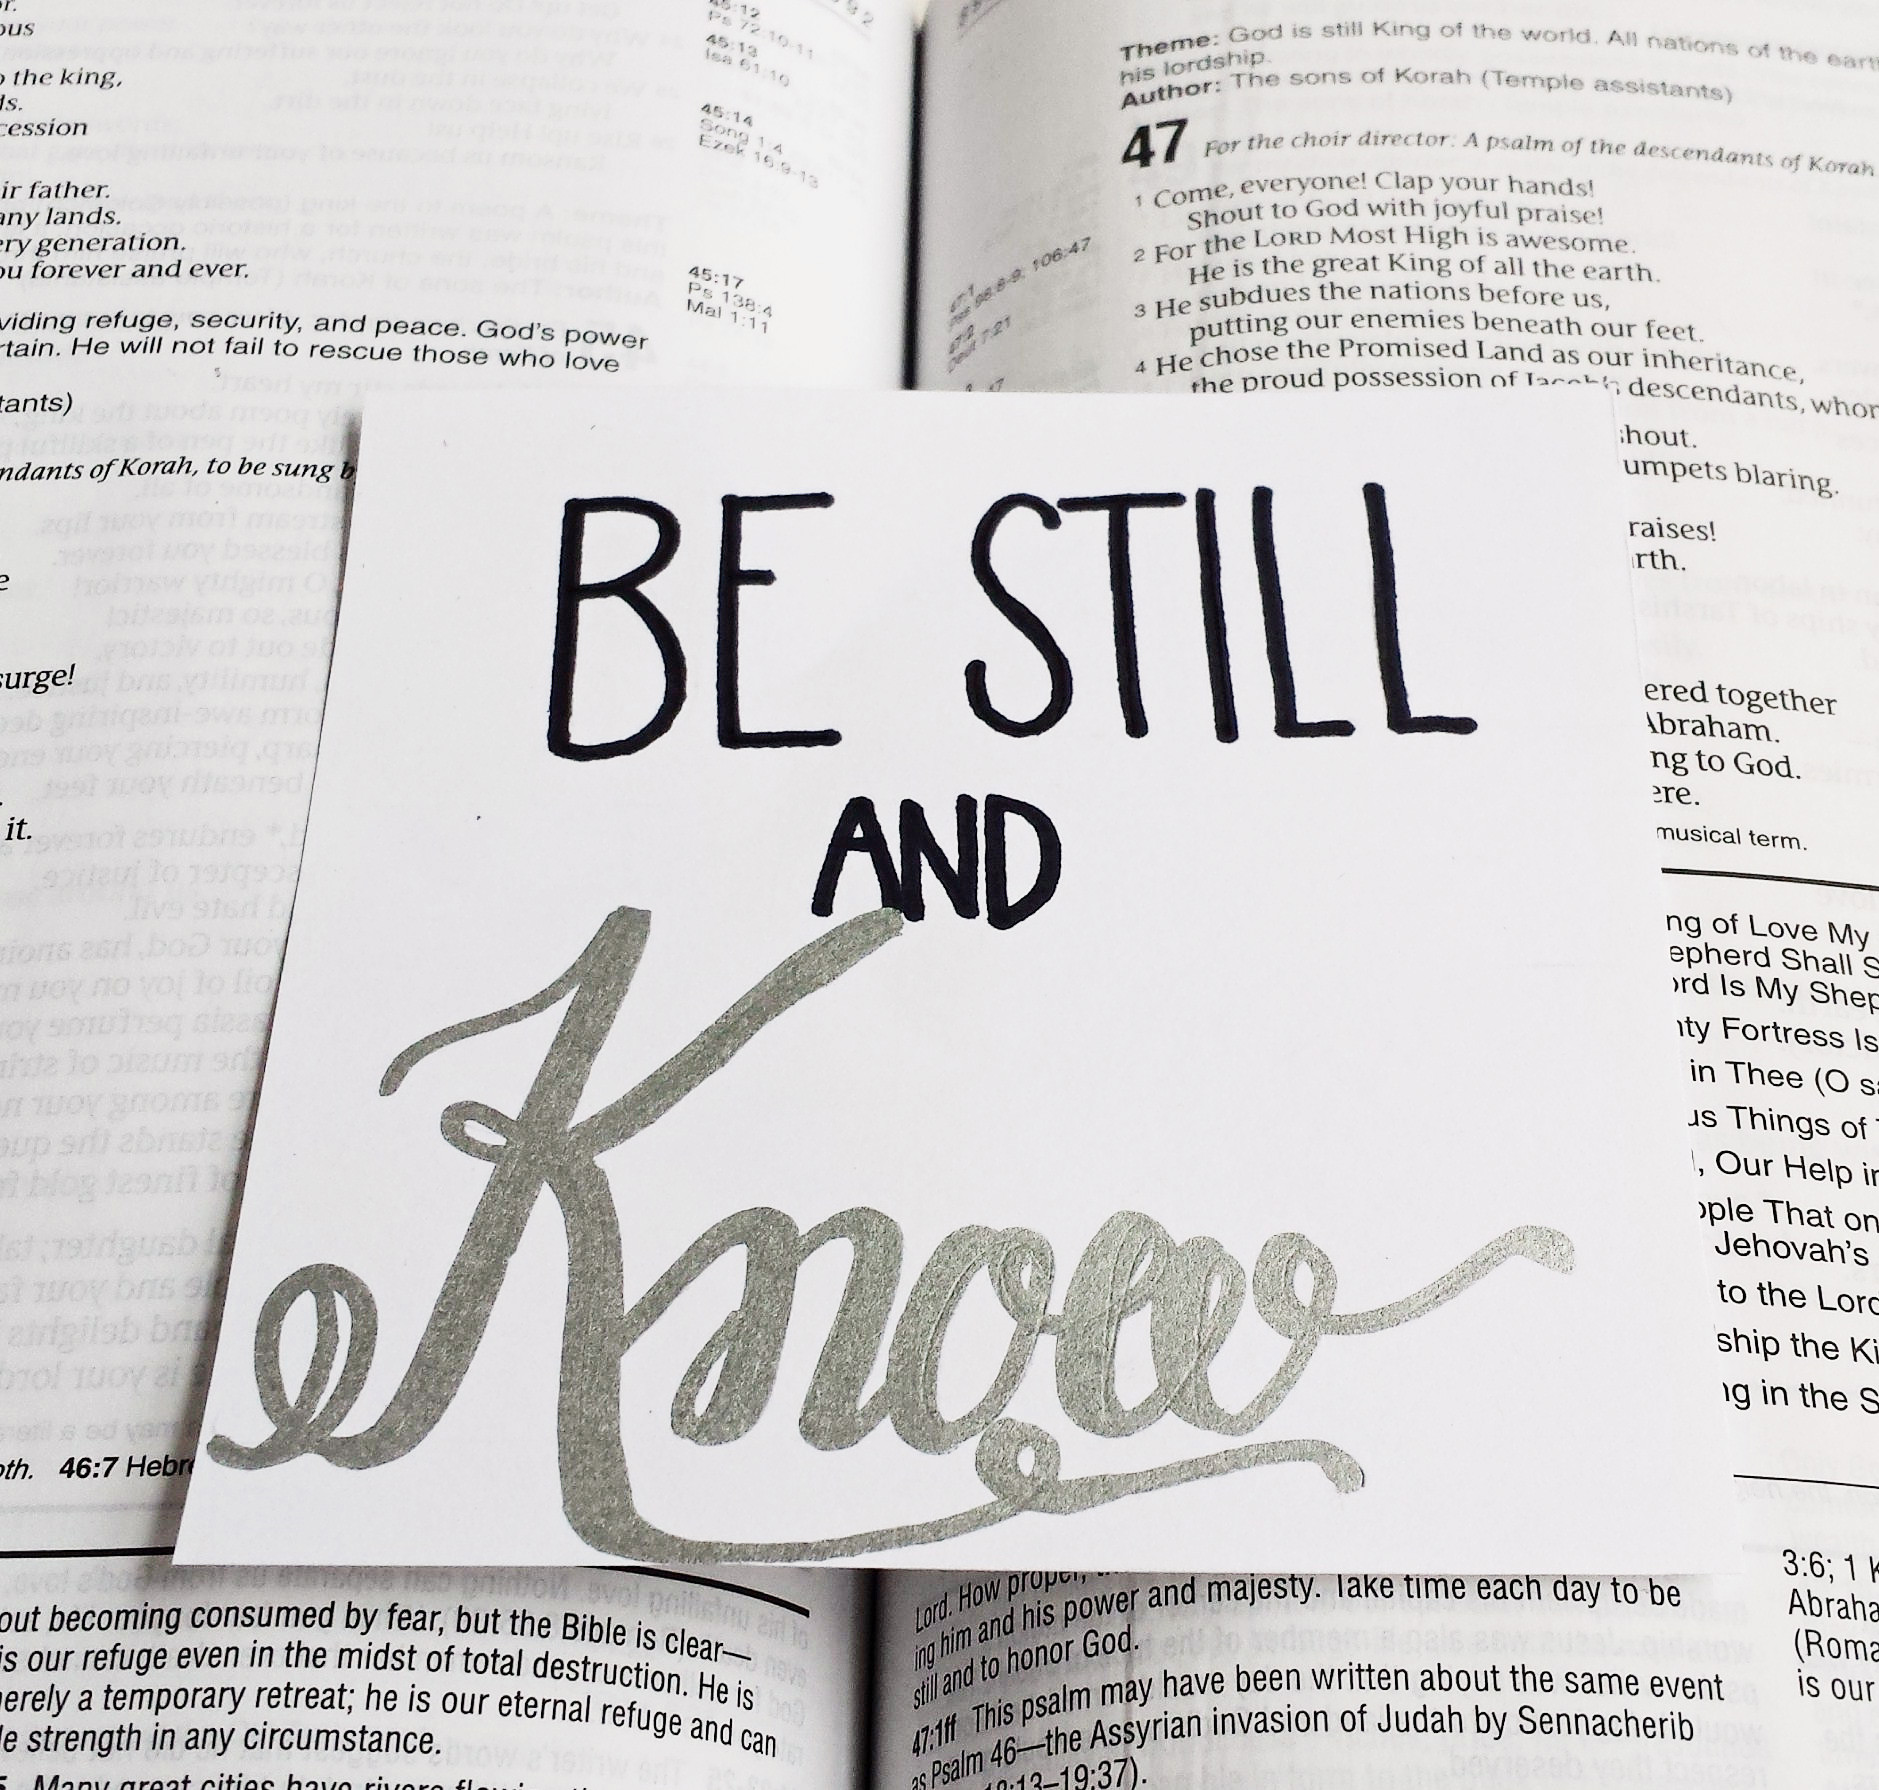 Be still and know.